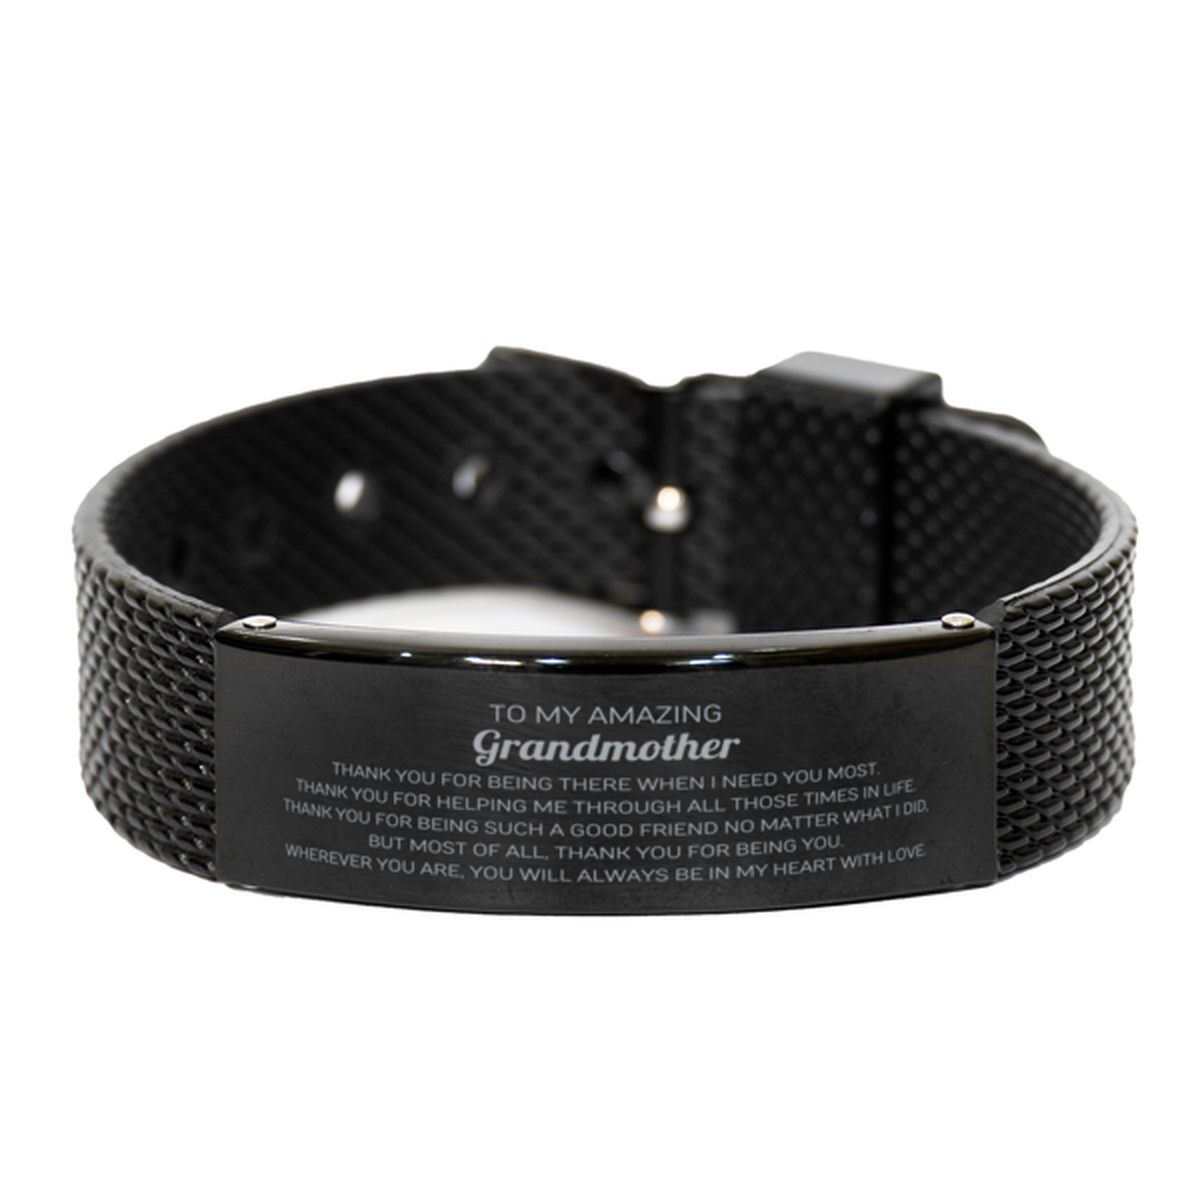 To My Amazing Grandmother Black Shark Mesh Bracelet, Thank you for being there, Thank You Gifts For Grandmother, Birthday, Christmas Unique Gifts For Grandmother